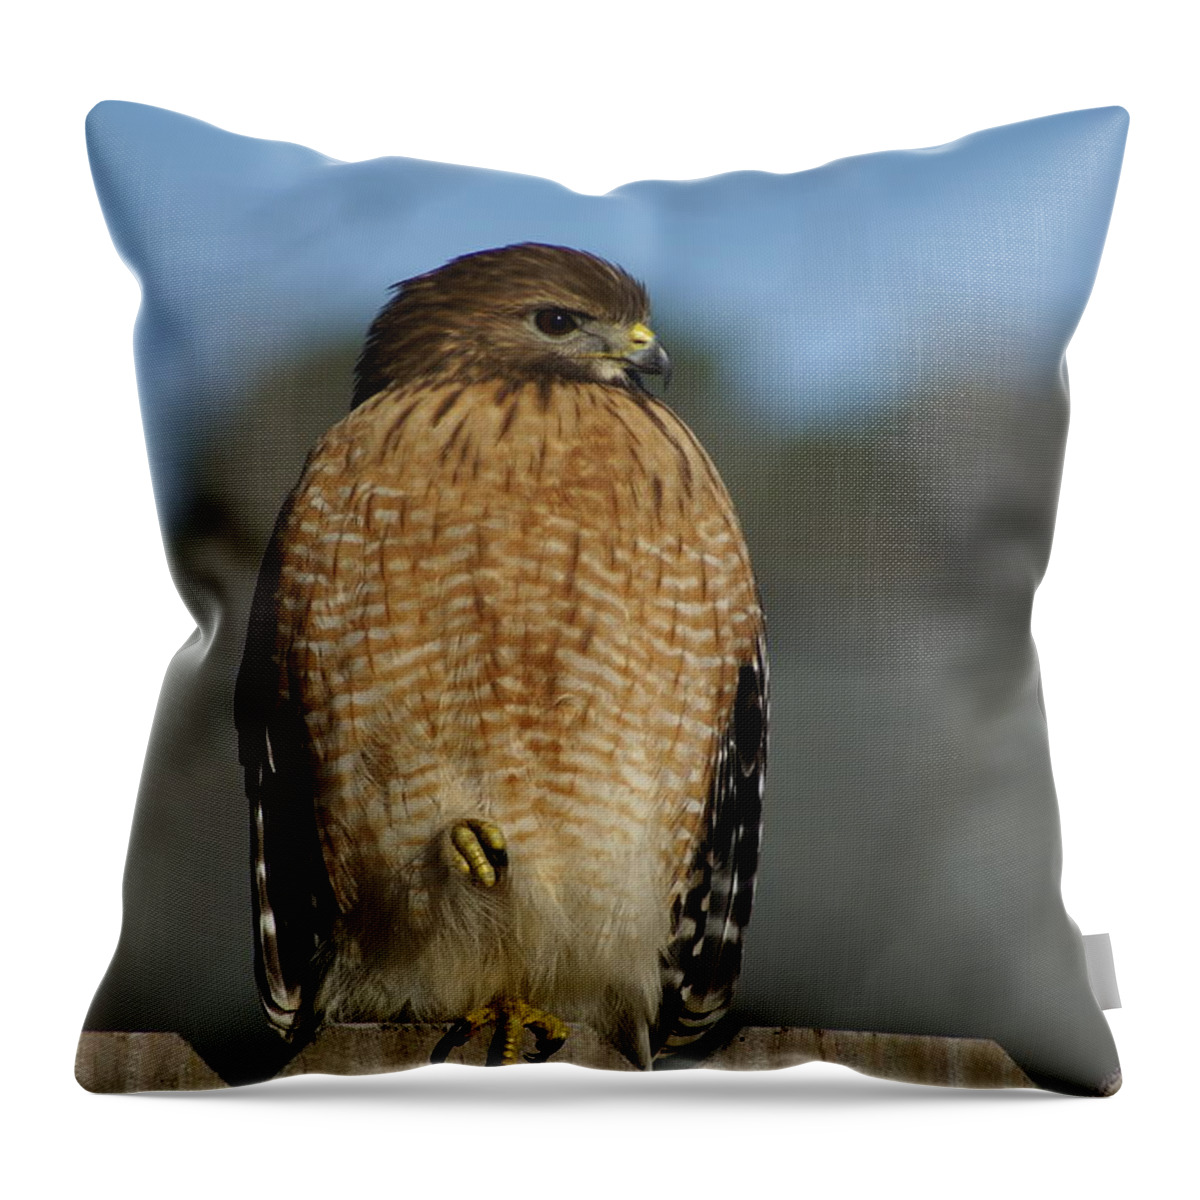  Throw Pillow featuring the photograph Chilling Hawk by Heather E Harman